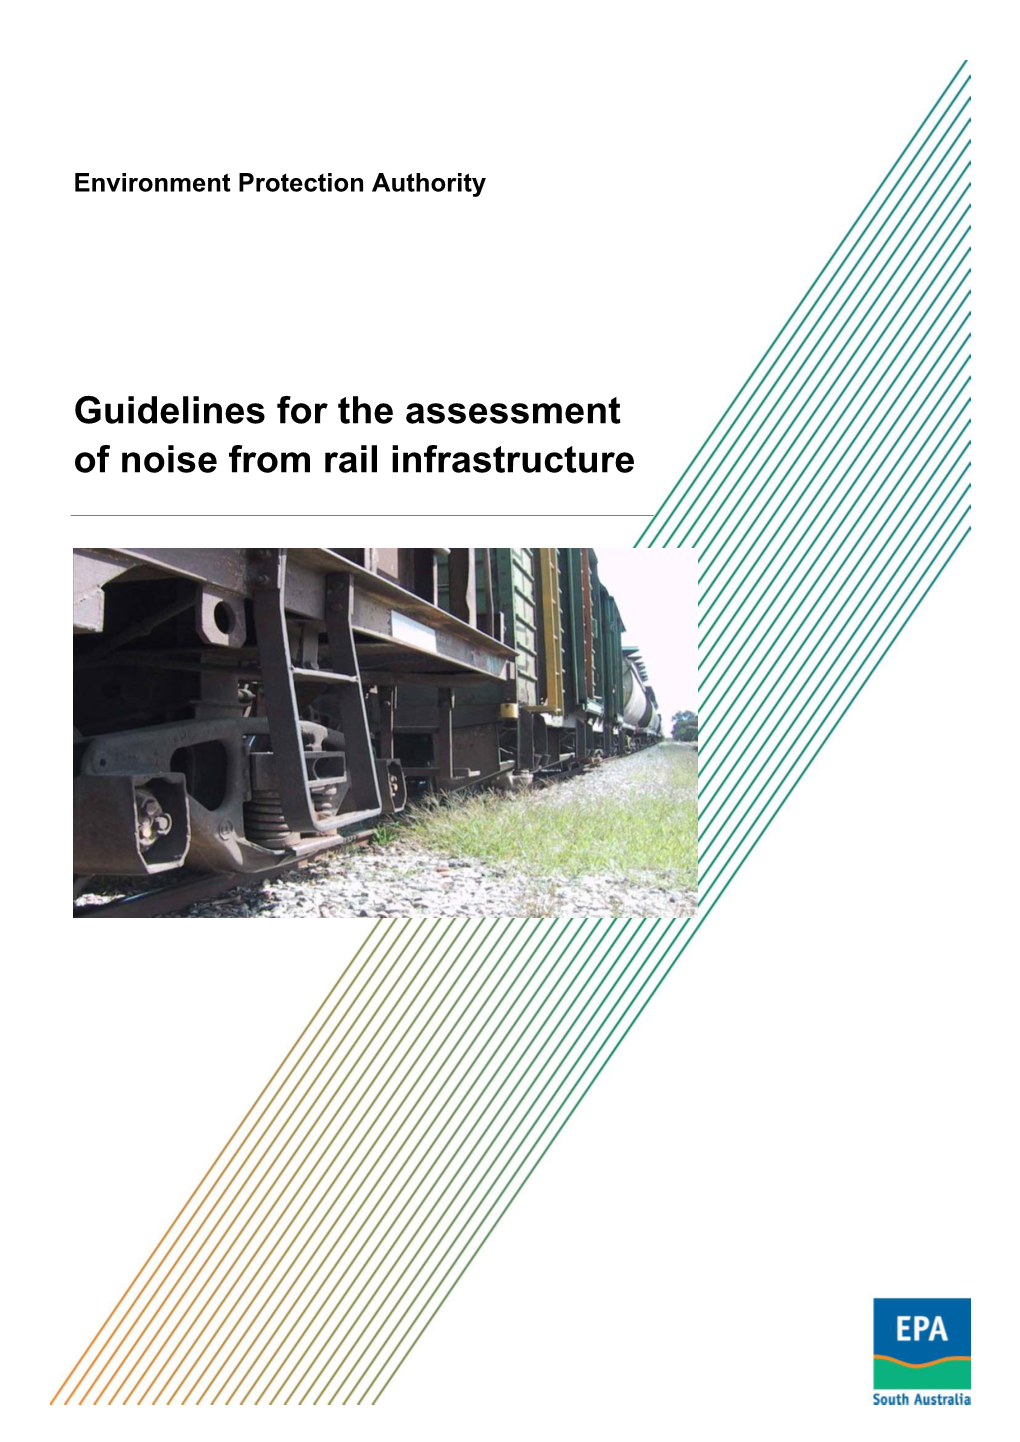 Guidelines for the Assessment of Noise from Rail Infrastructure